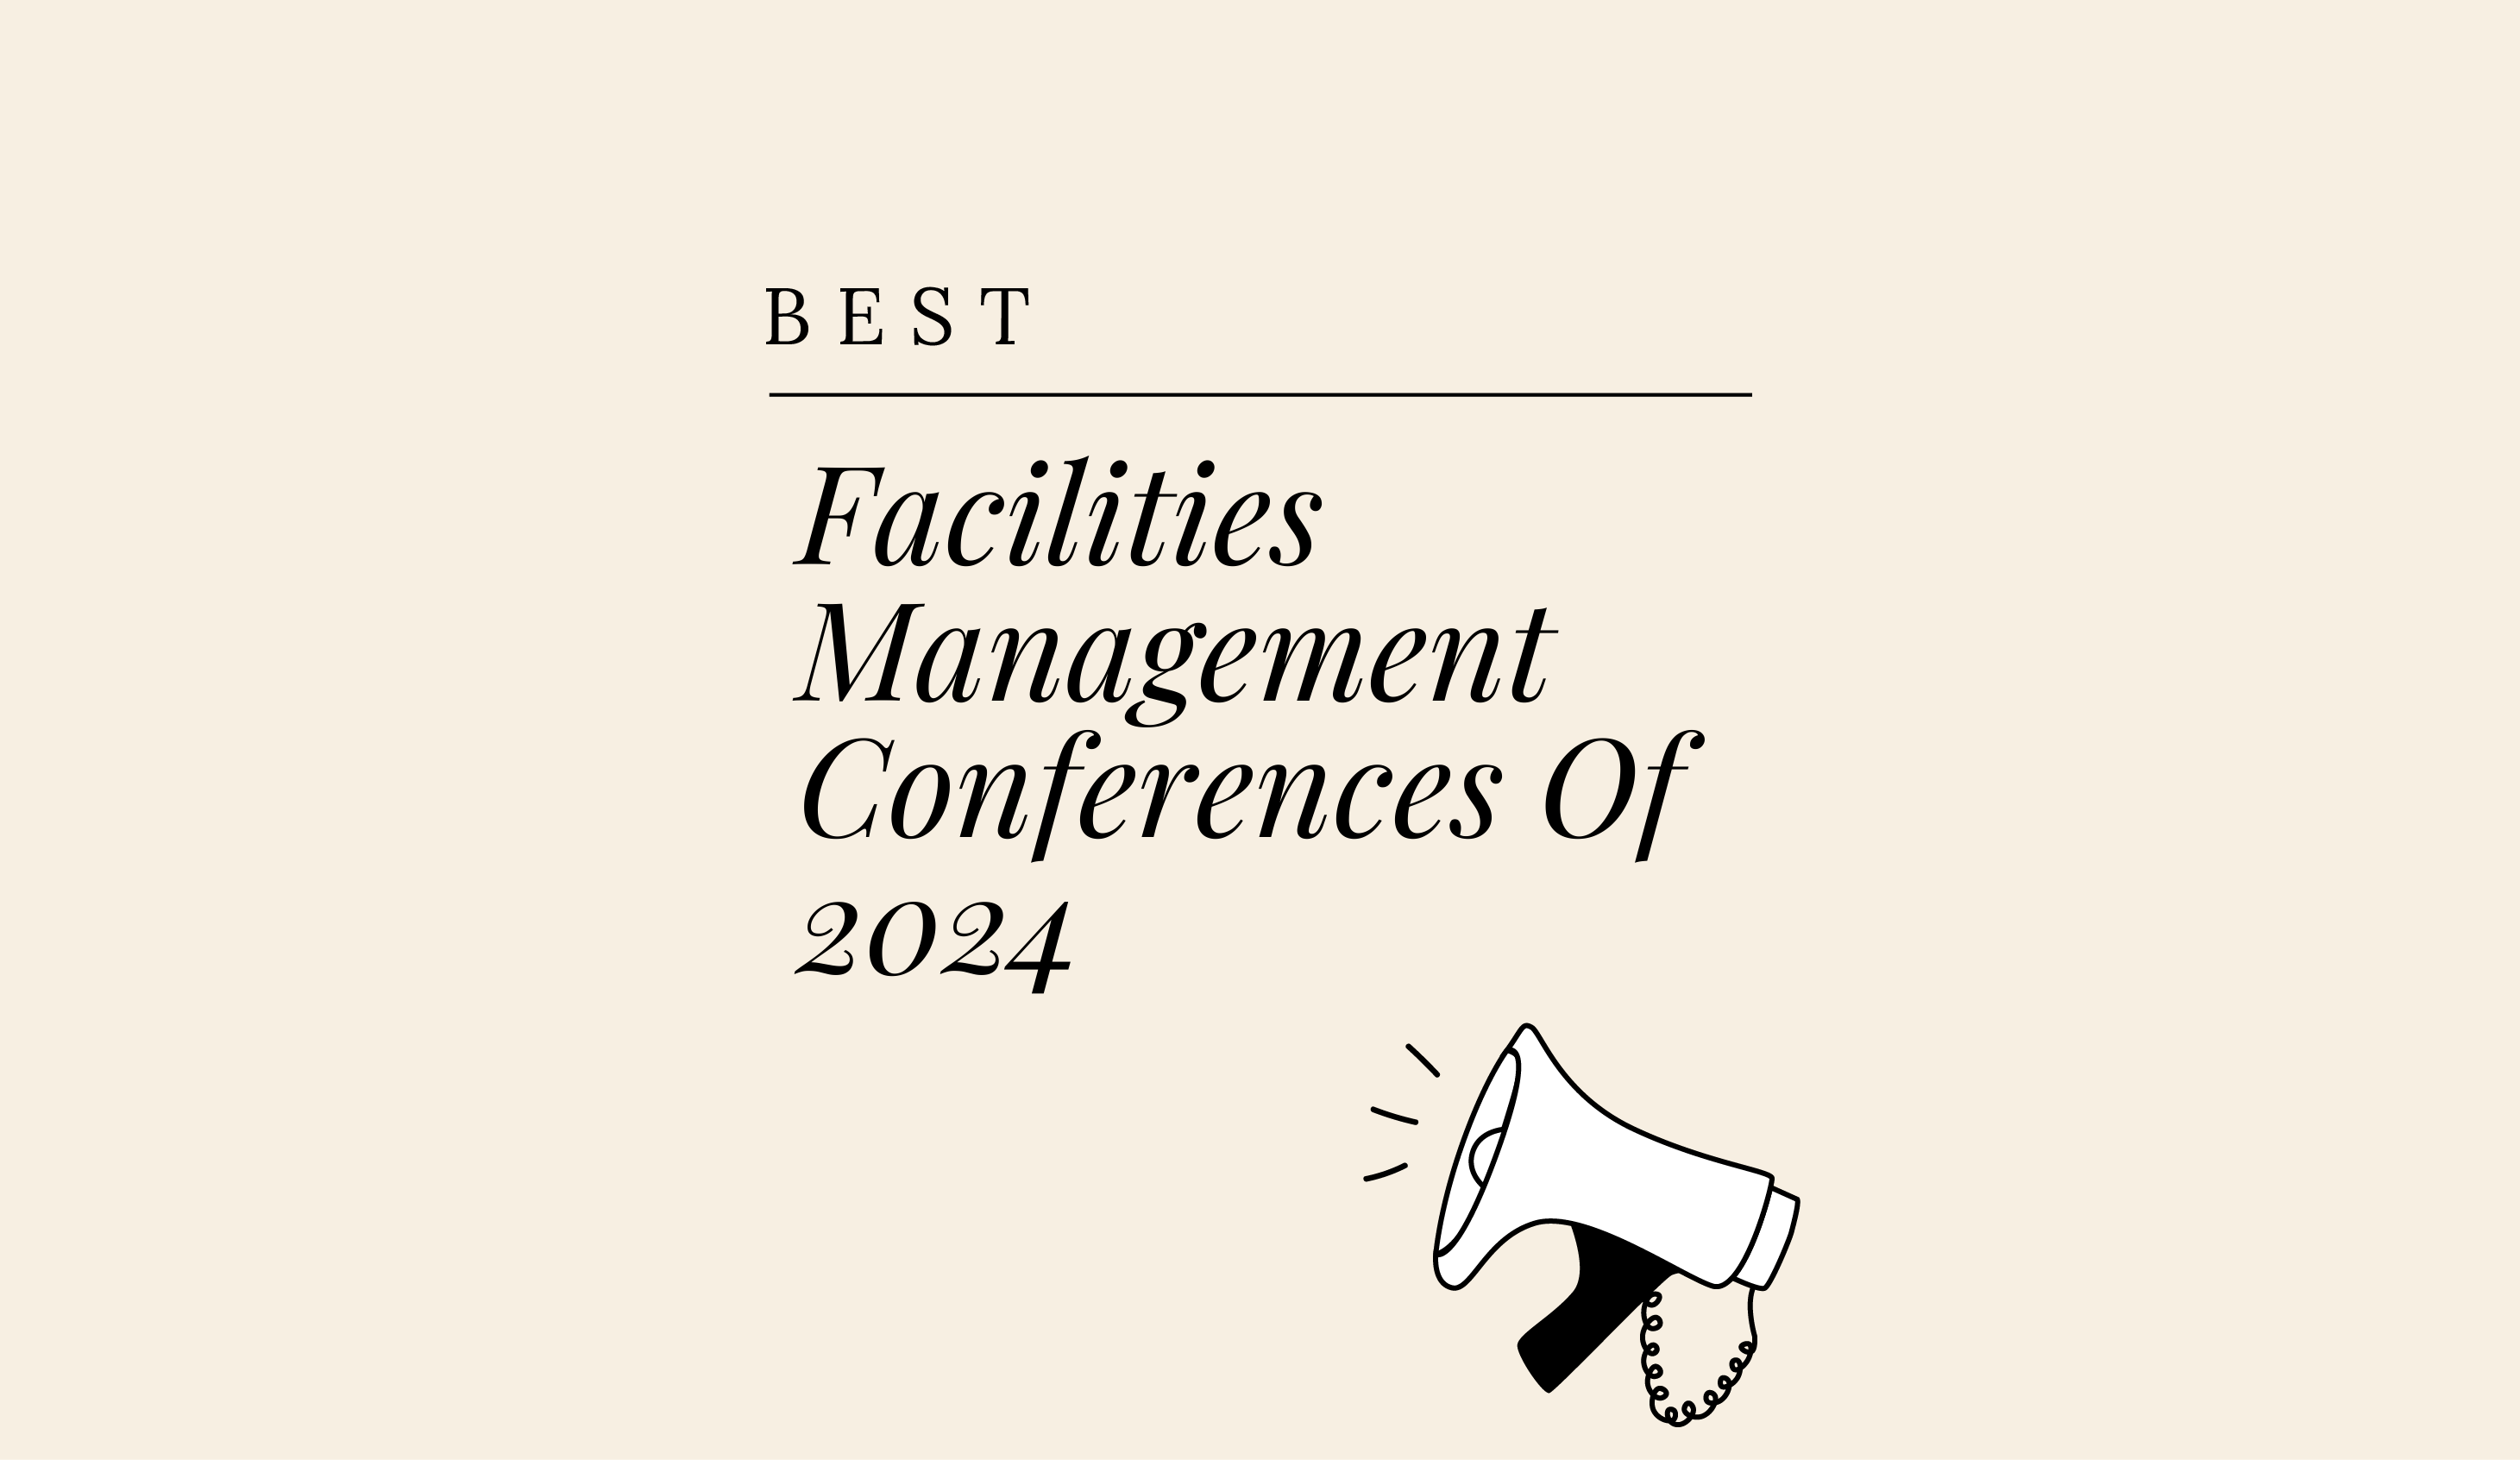 HOT-facilities-management-conferences-of-2024-featured-image-2105